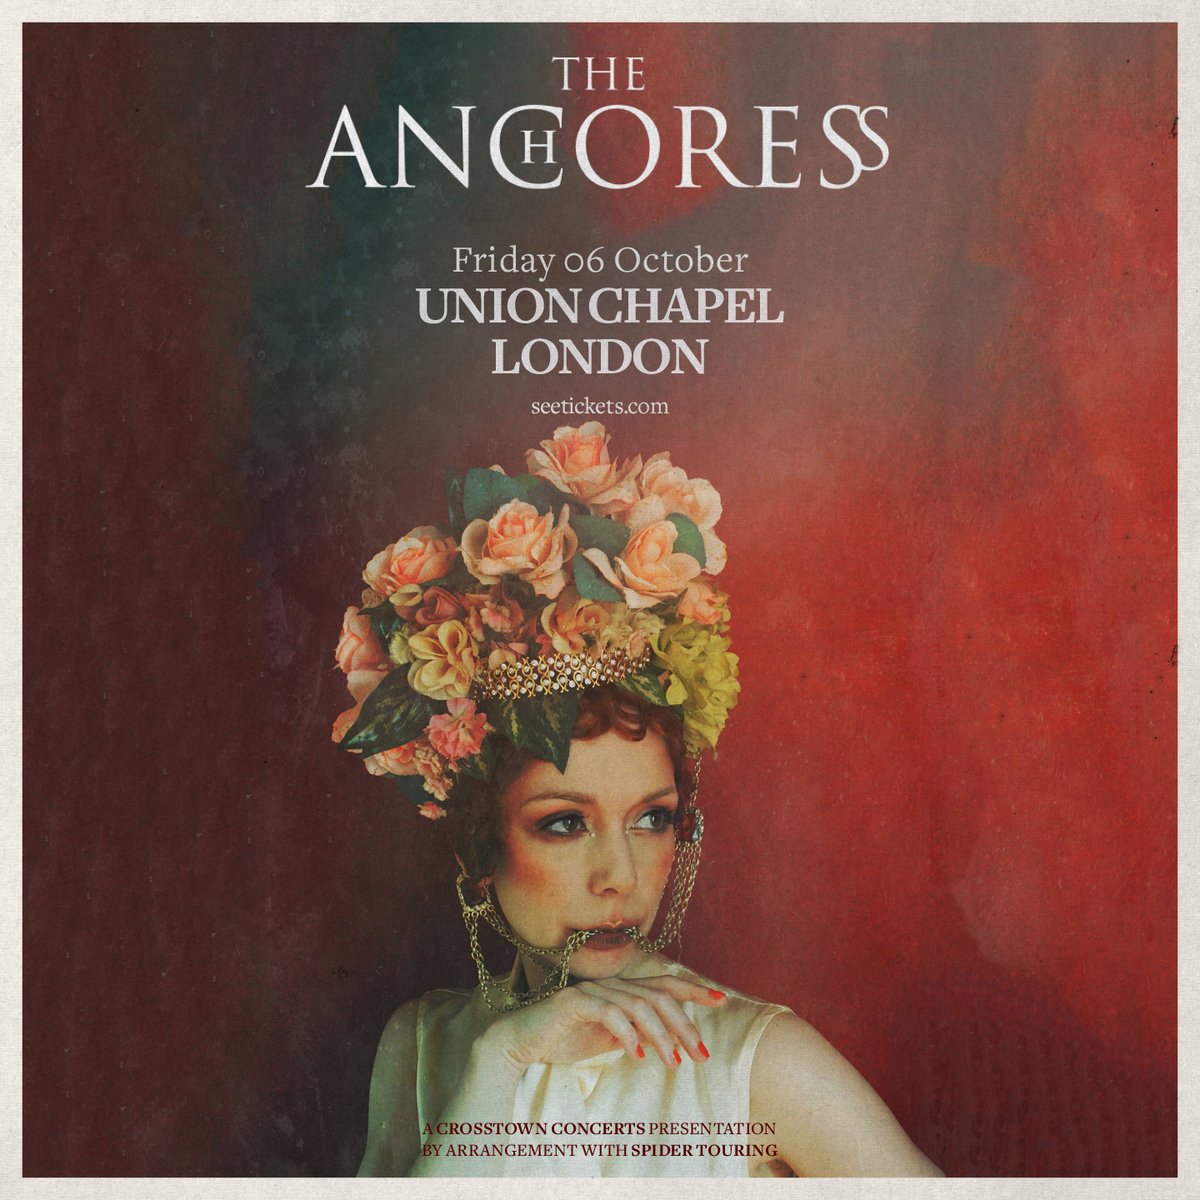 The Anchoress On Twitter Tickets Are Now On General Sale For My Show At The Iconic 